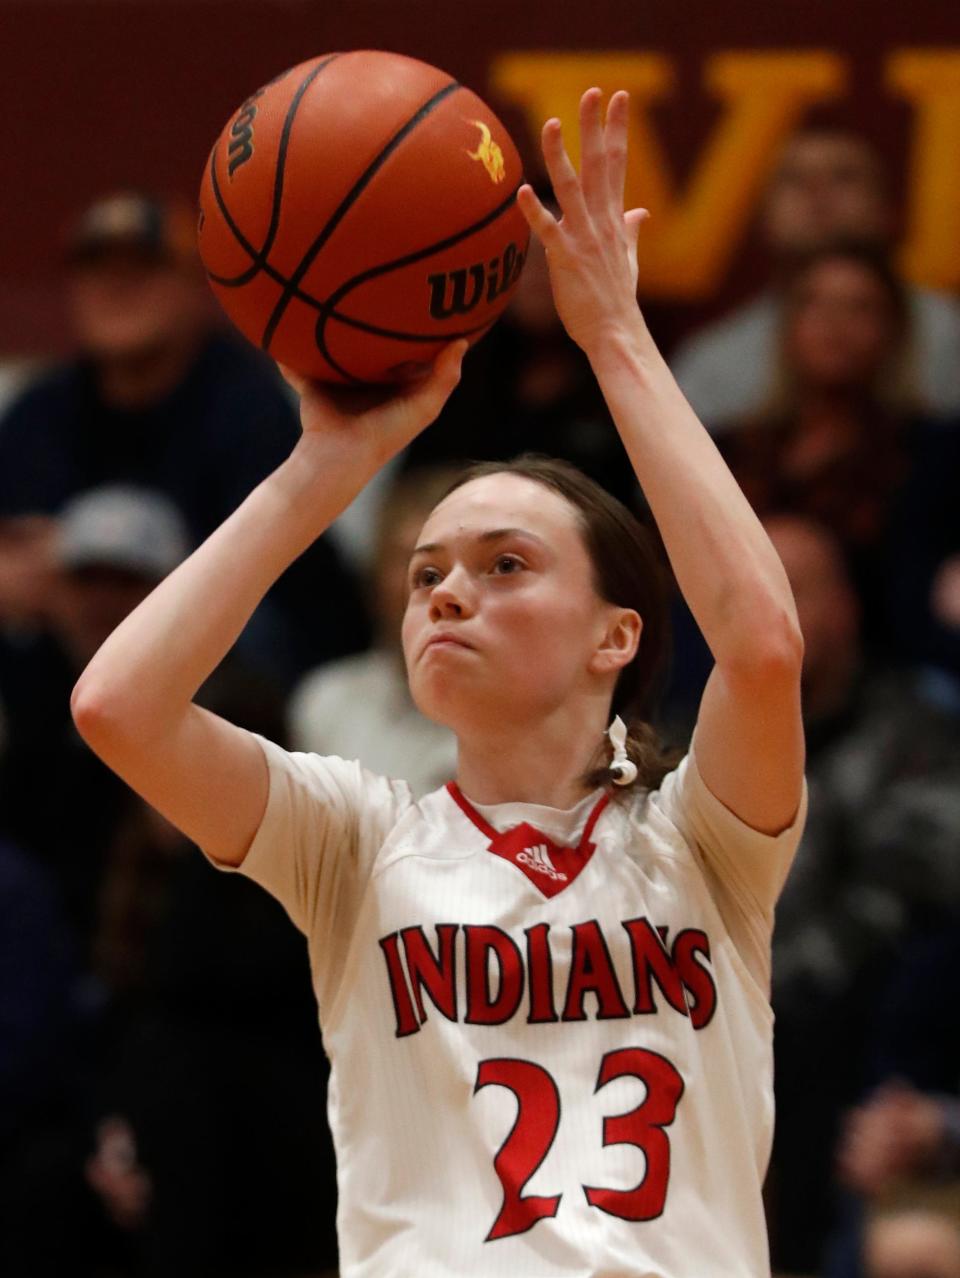 Twin Lakes guard Addi Ward (23) goes up for a shot during the IU Health Hoops Classic girls basketball championship game against the Harrison Raiders, Saturday, Nov. 19, 2022, at McCutcheon High School in Lafayette, Ind. Twin Lakes won 55-33.